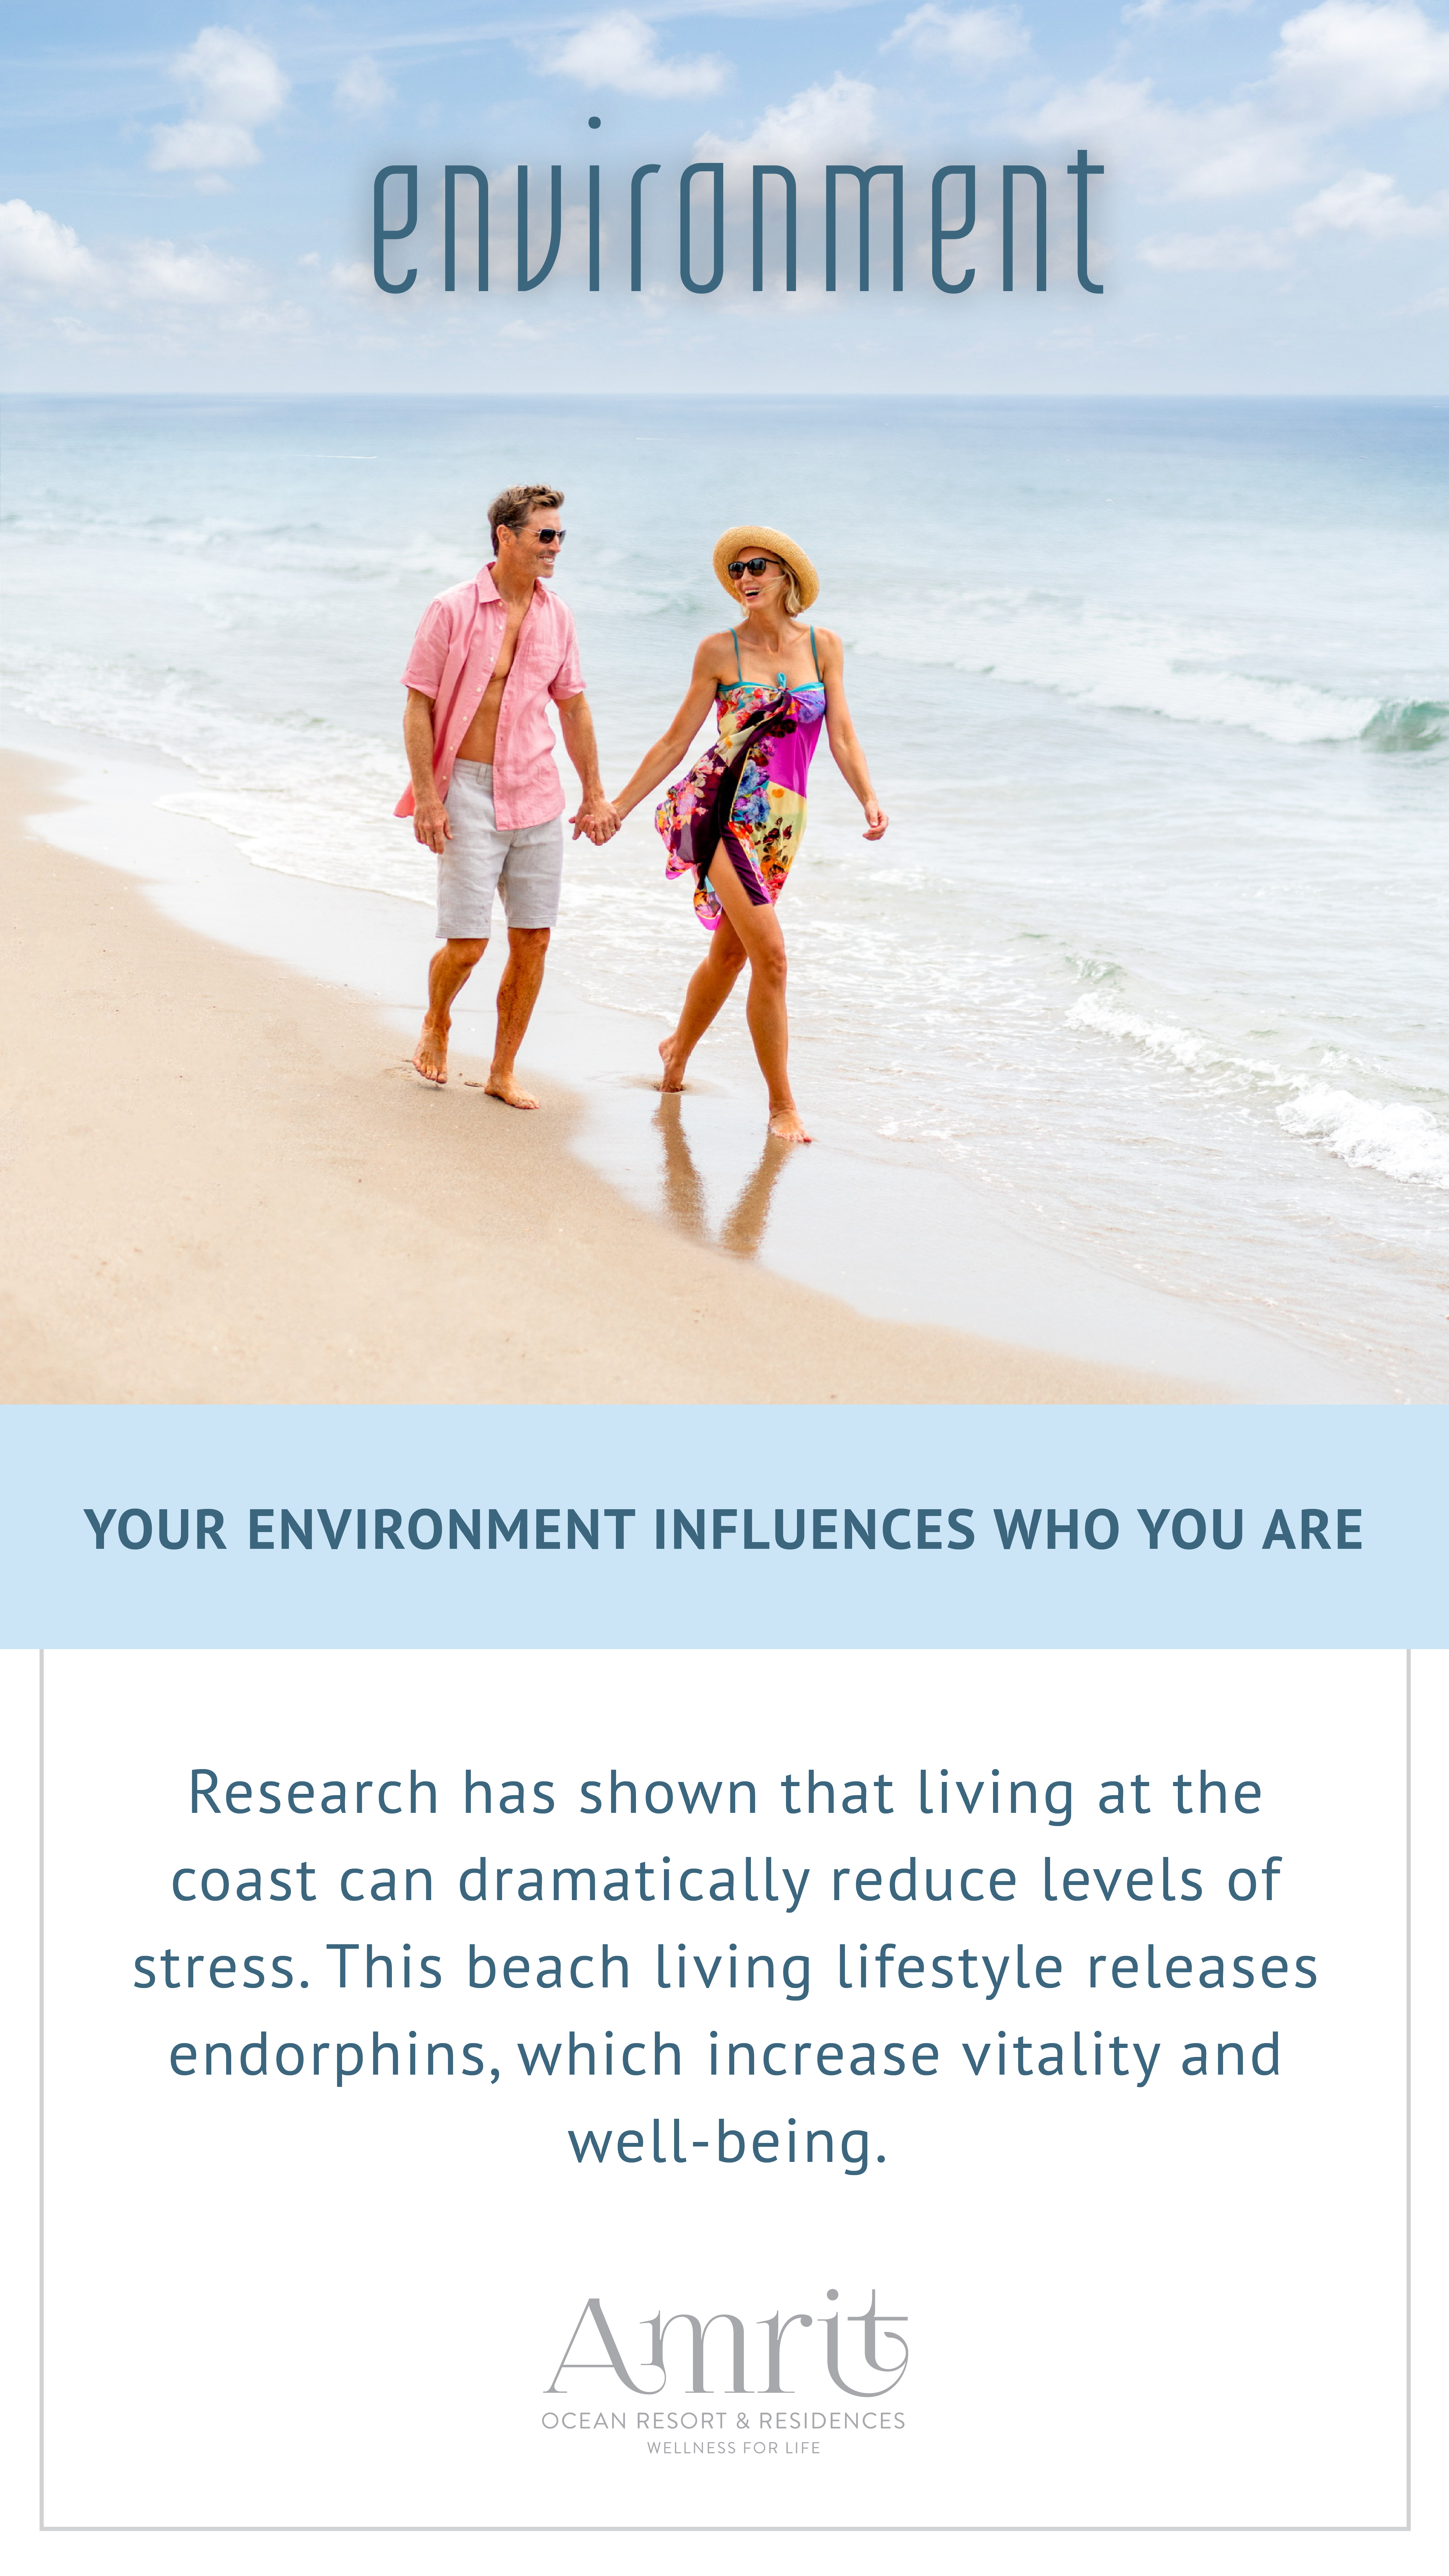 Research has shown that living at the coast can dramatically reduce levels of stress.